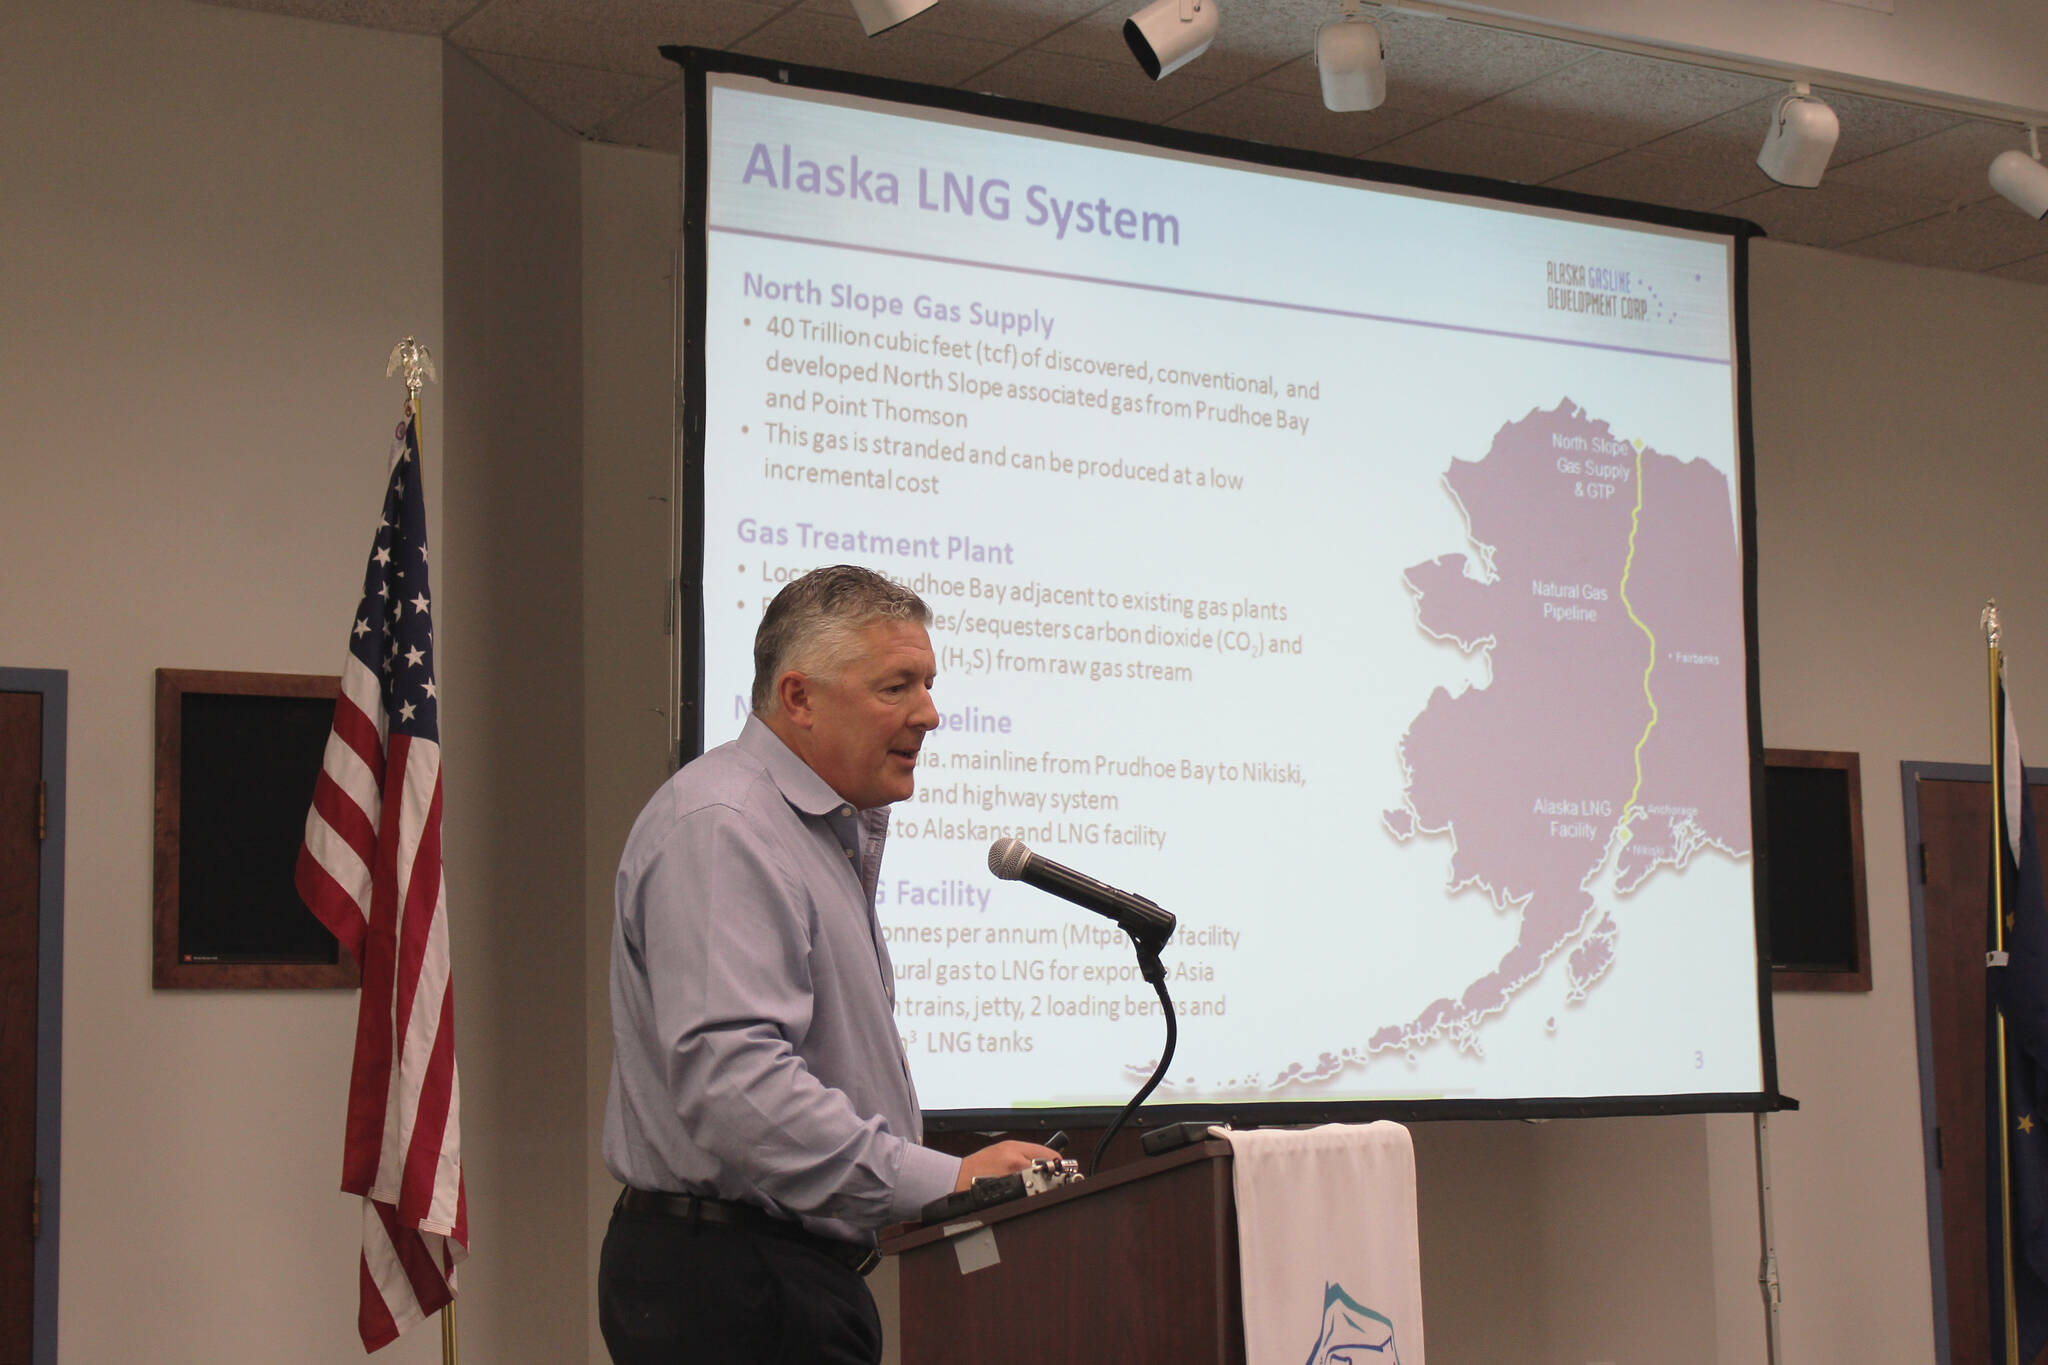 Alaska LNG Project Manager Brad Chastain presents information about the project during a luncheon at the Kenai Chamber Commerce and Visitor Center on Wednesday, July 6, 2022, in Kenai, Alaska. (Ashlyn O’Hara/Peninsula Clarion)